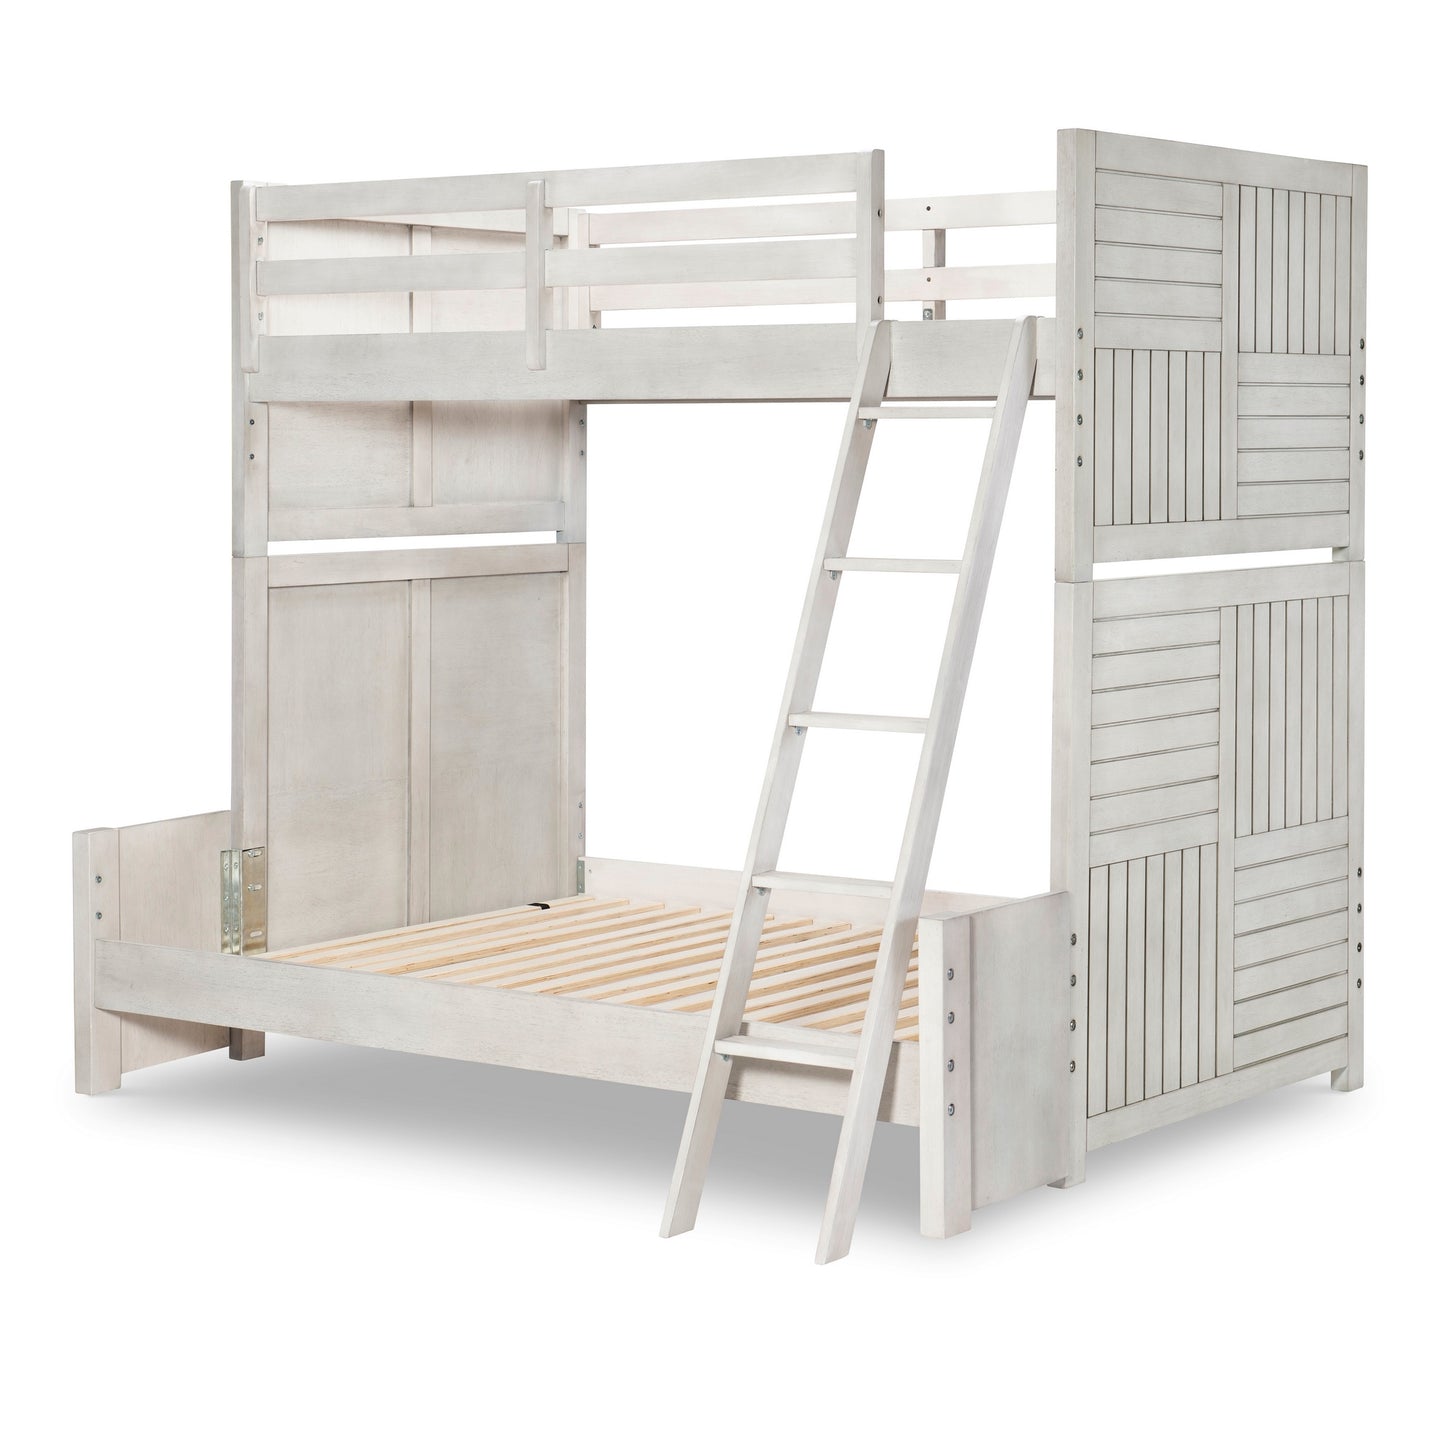 Summer Camp Twin Over Full Bunk Bed - Stone Path Gray